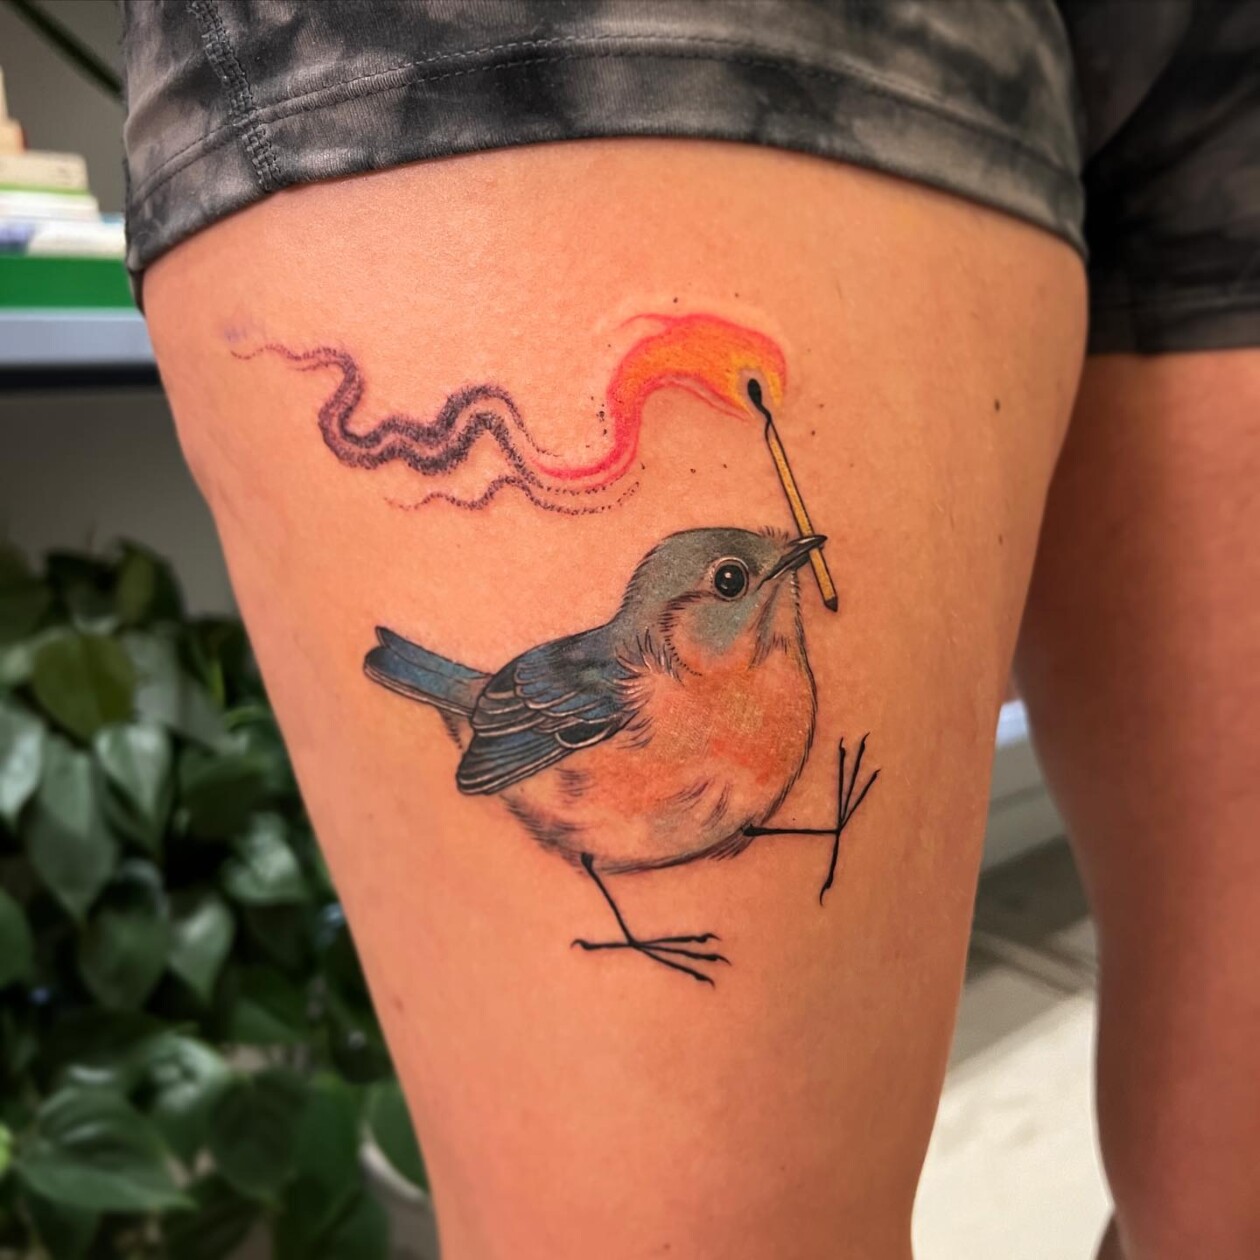 Stephanie Brown Creates Whimsical Tattoos Of Birds Holding A Lit Match Symbolizing Hope For A Better Future (12)